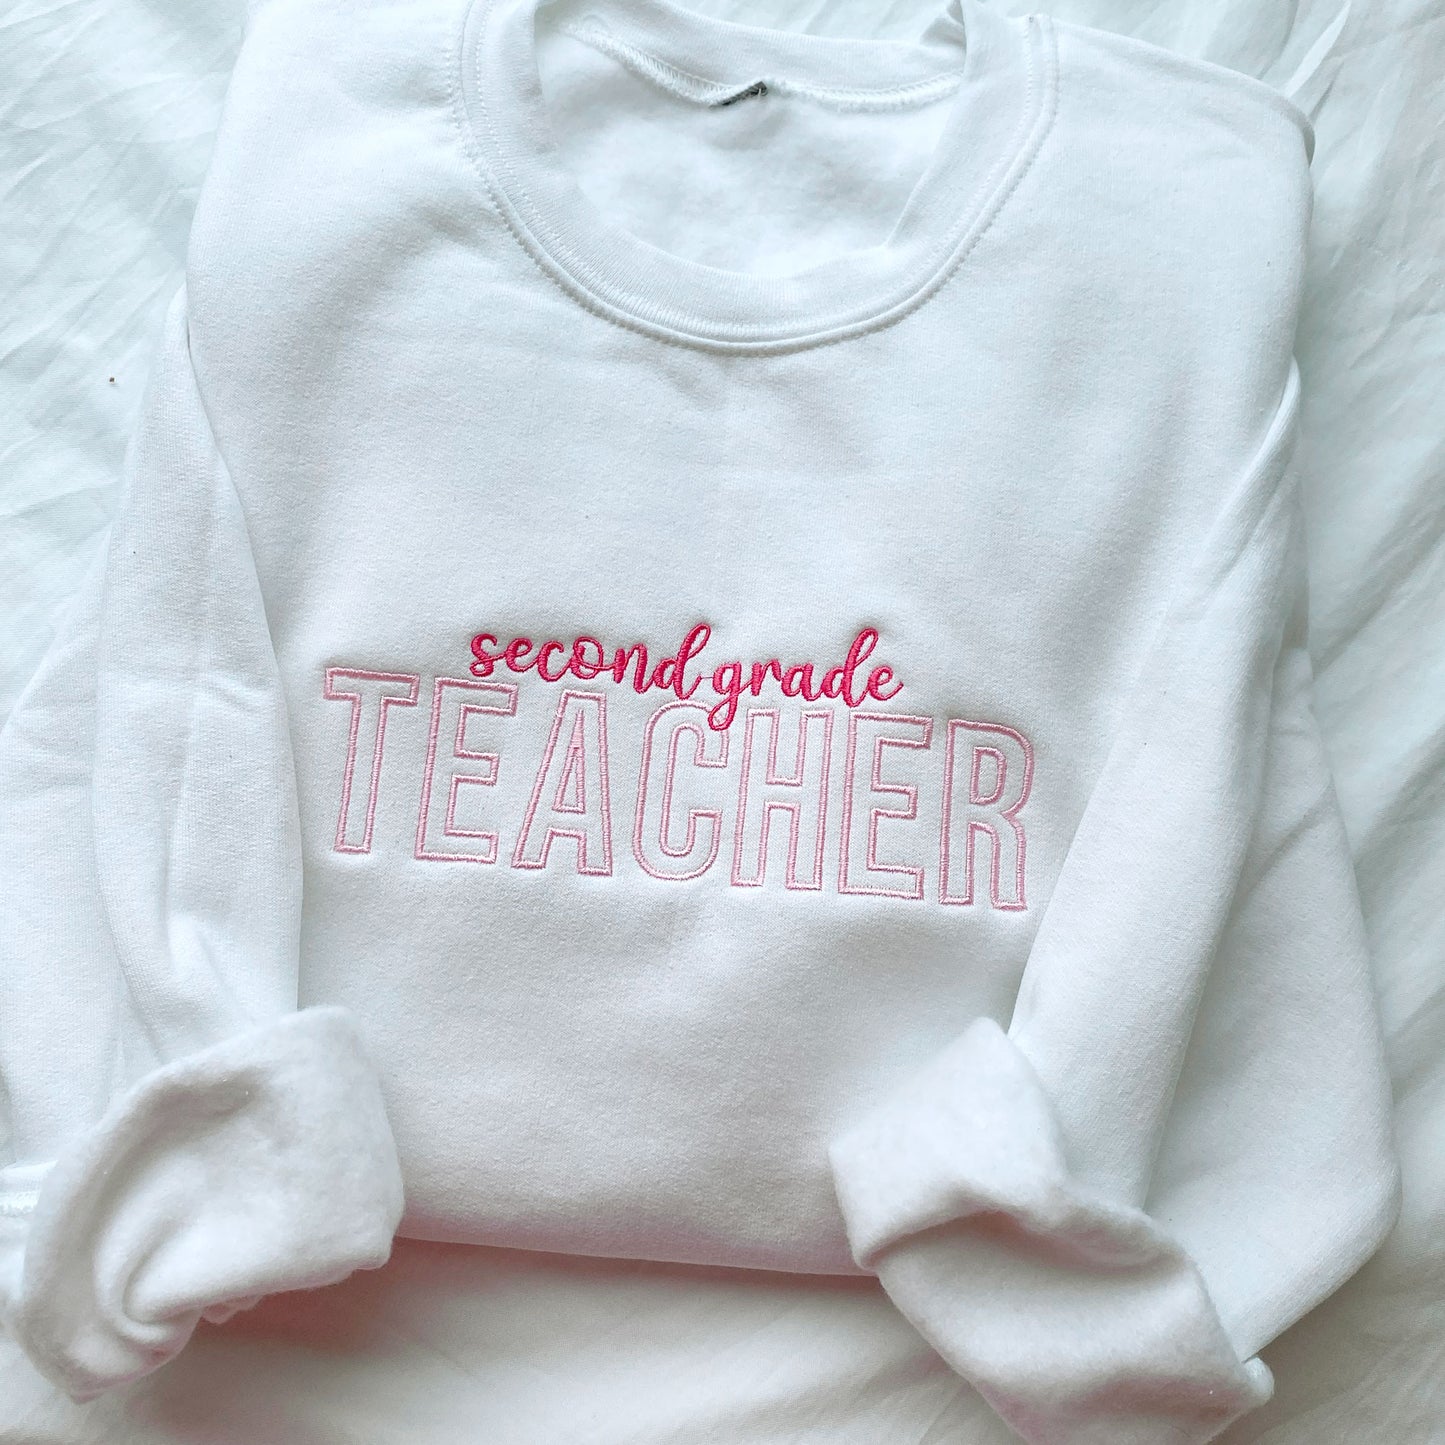 flat lay of a white crewneck sweatshirt with custom grade level and teacher embroidered design in pink and baby pink threads